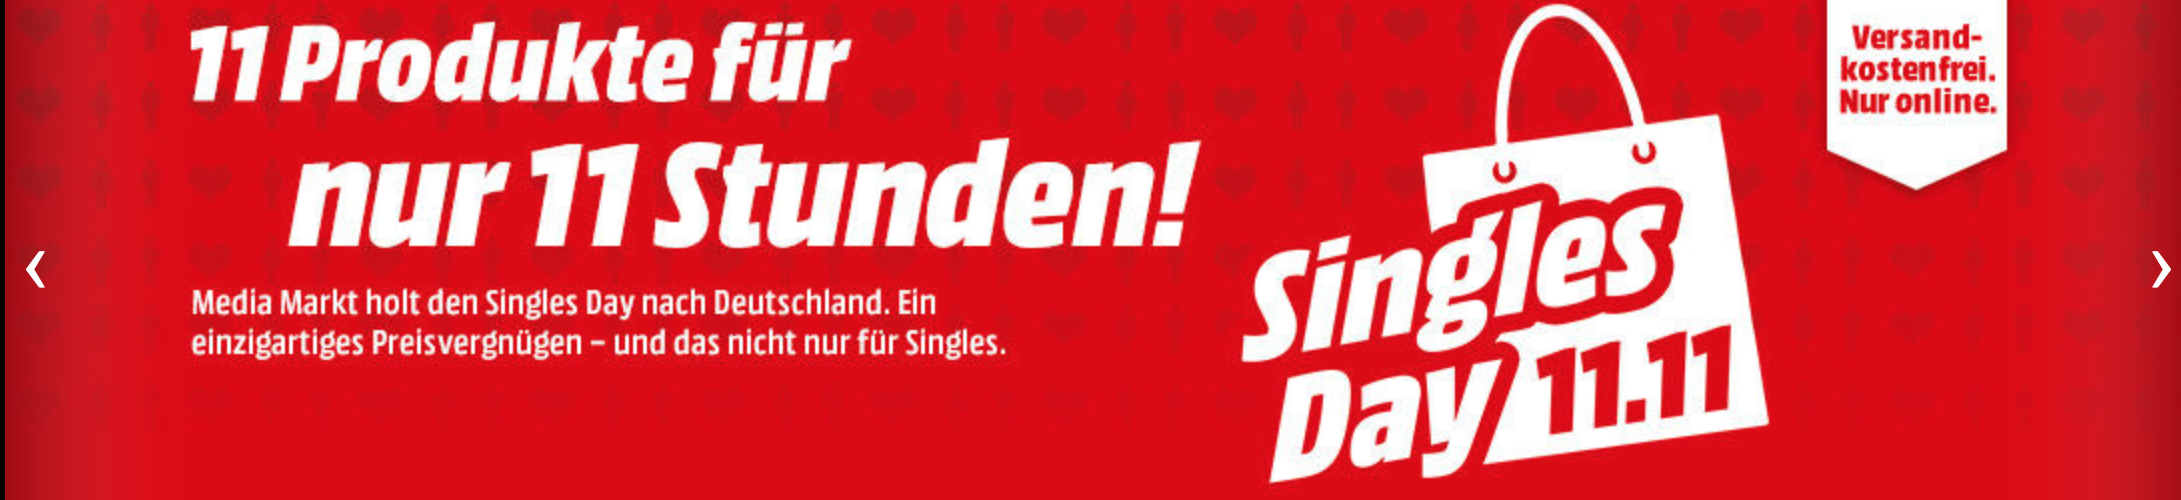 Singles Day Angebote